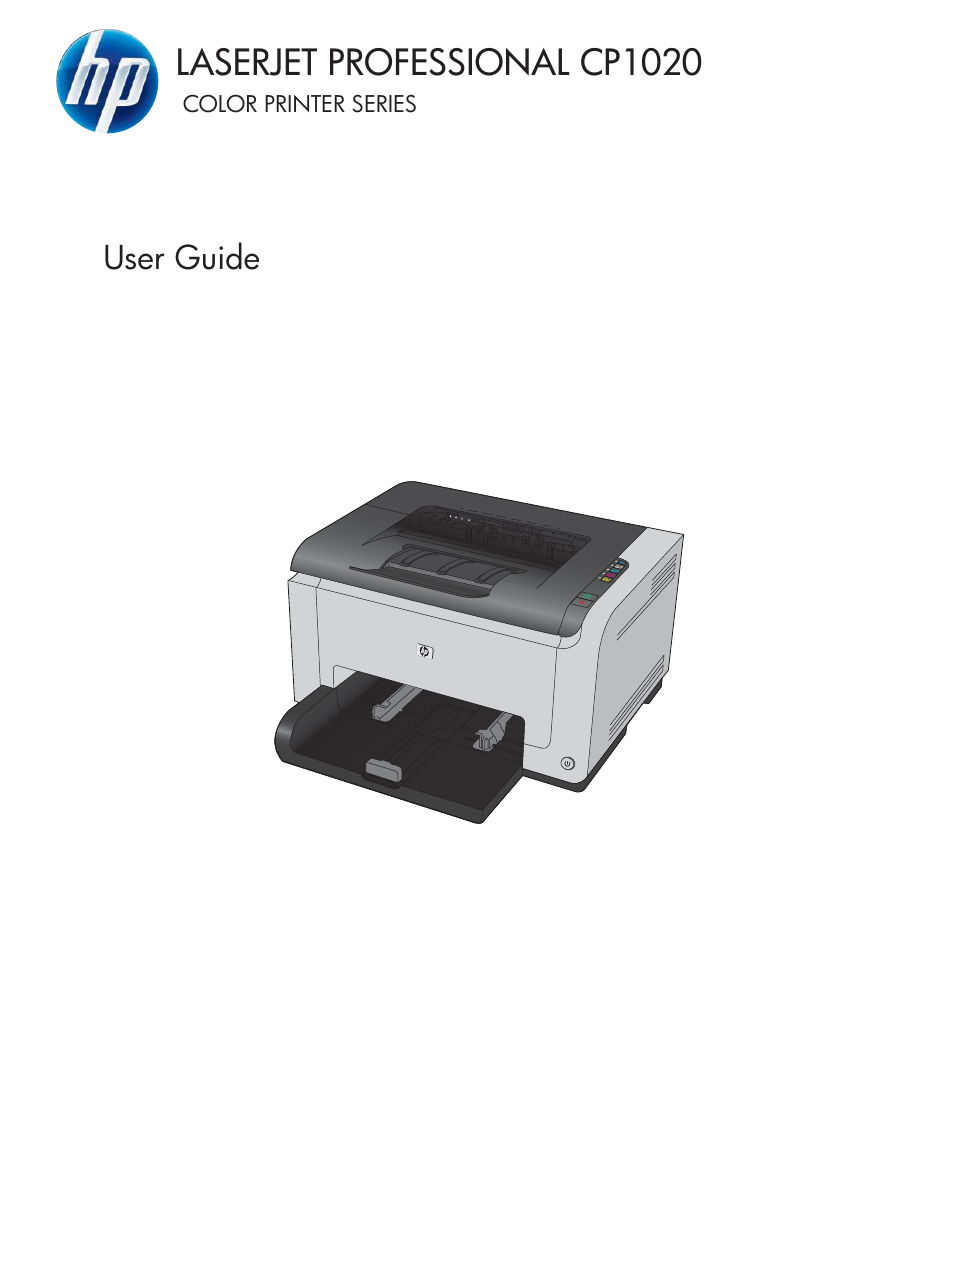 HP LaserJet Pro CP1025nw Color Printer User Manual | 186 pages